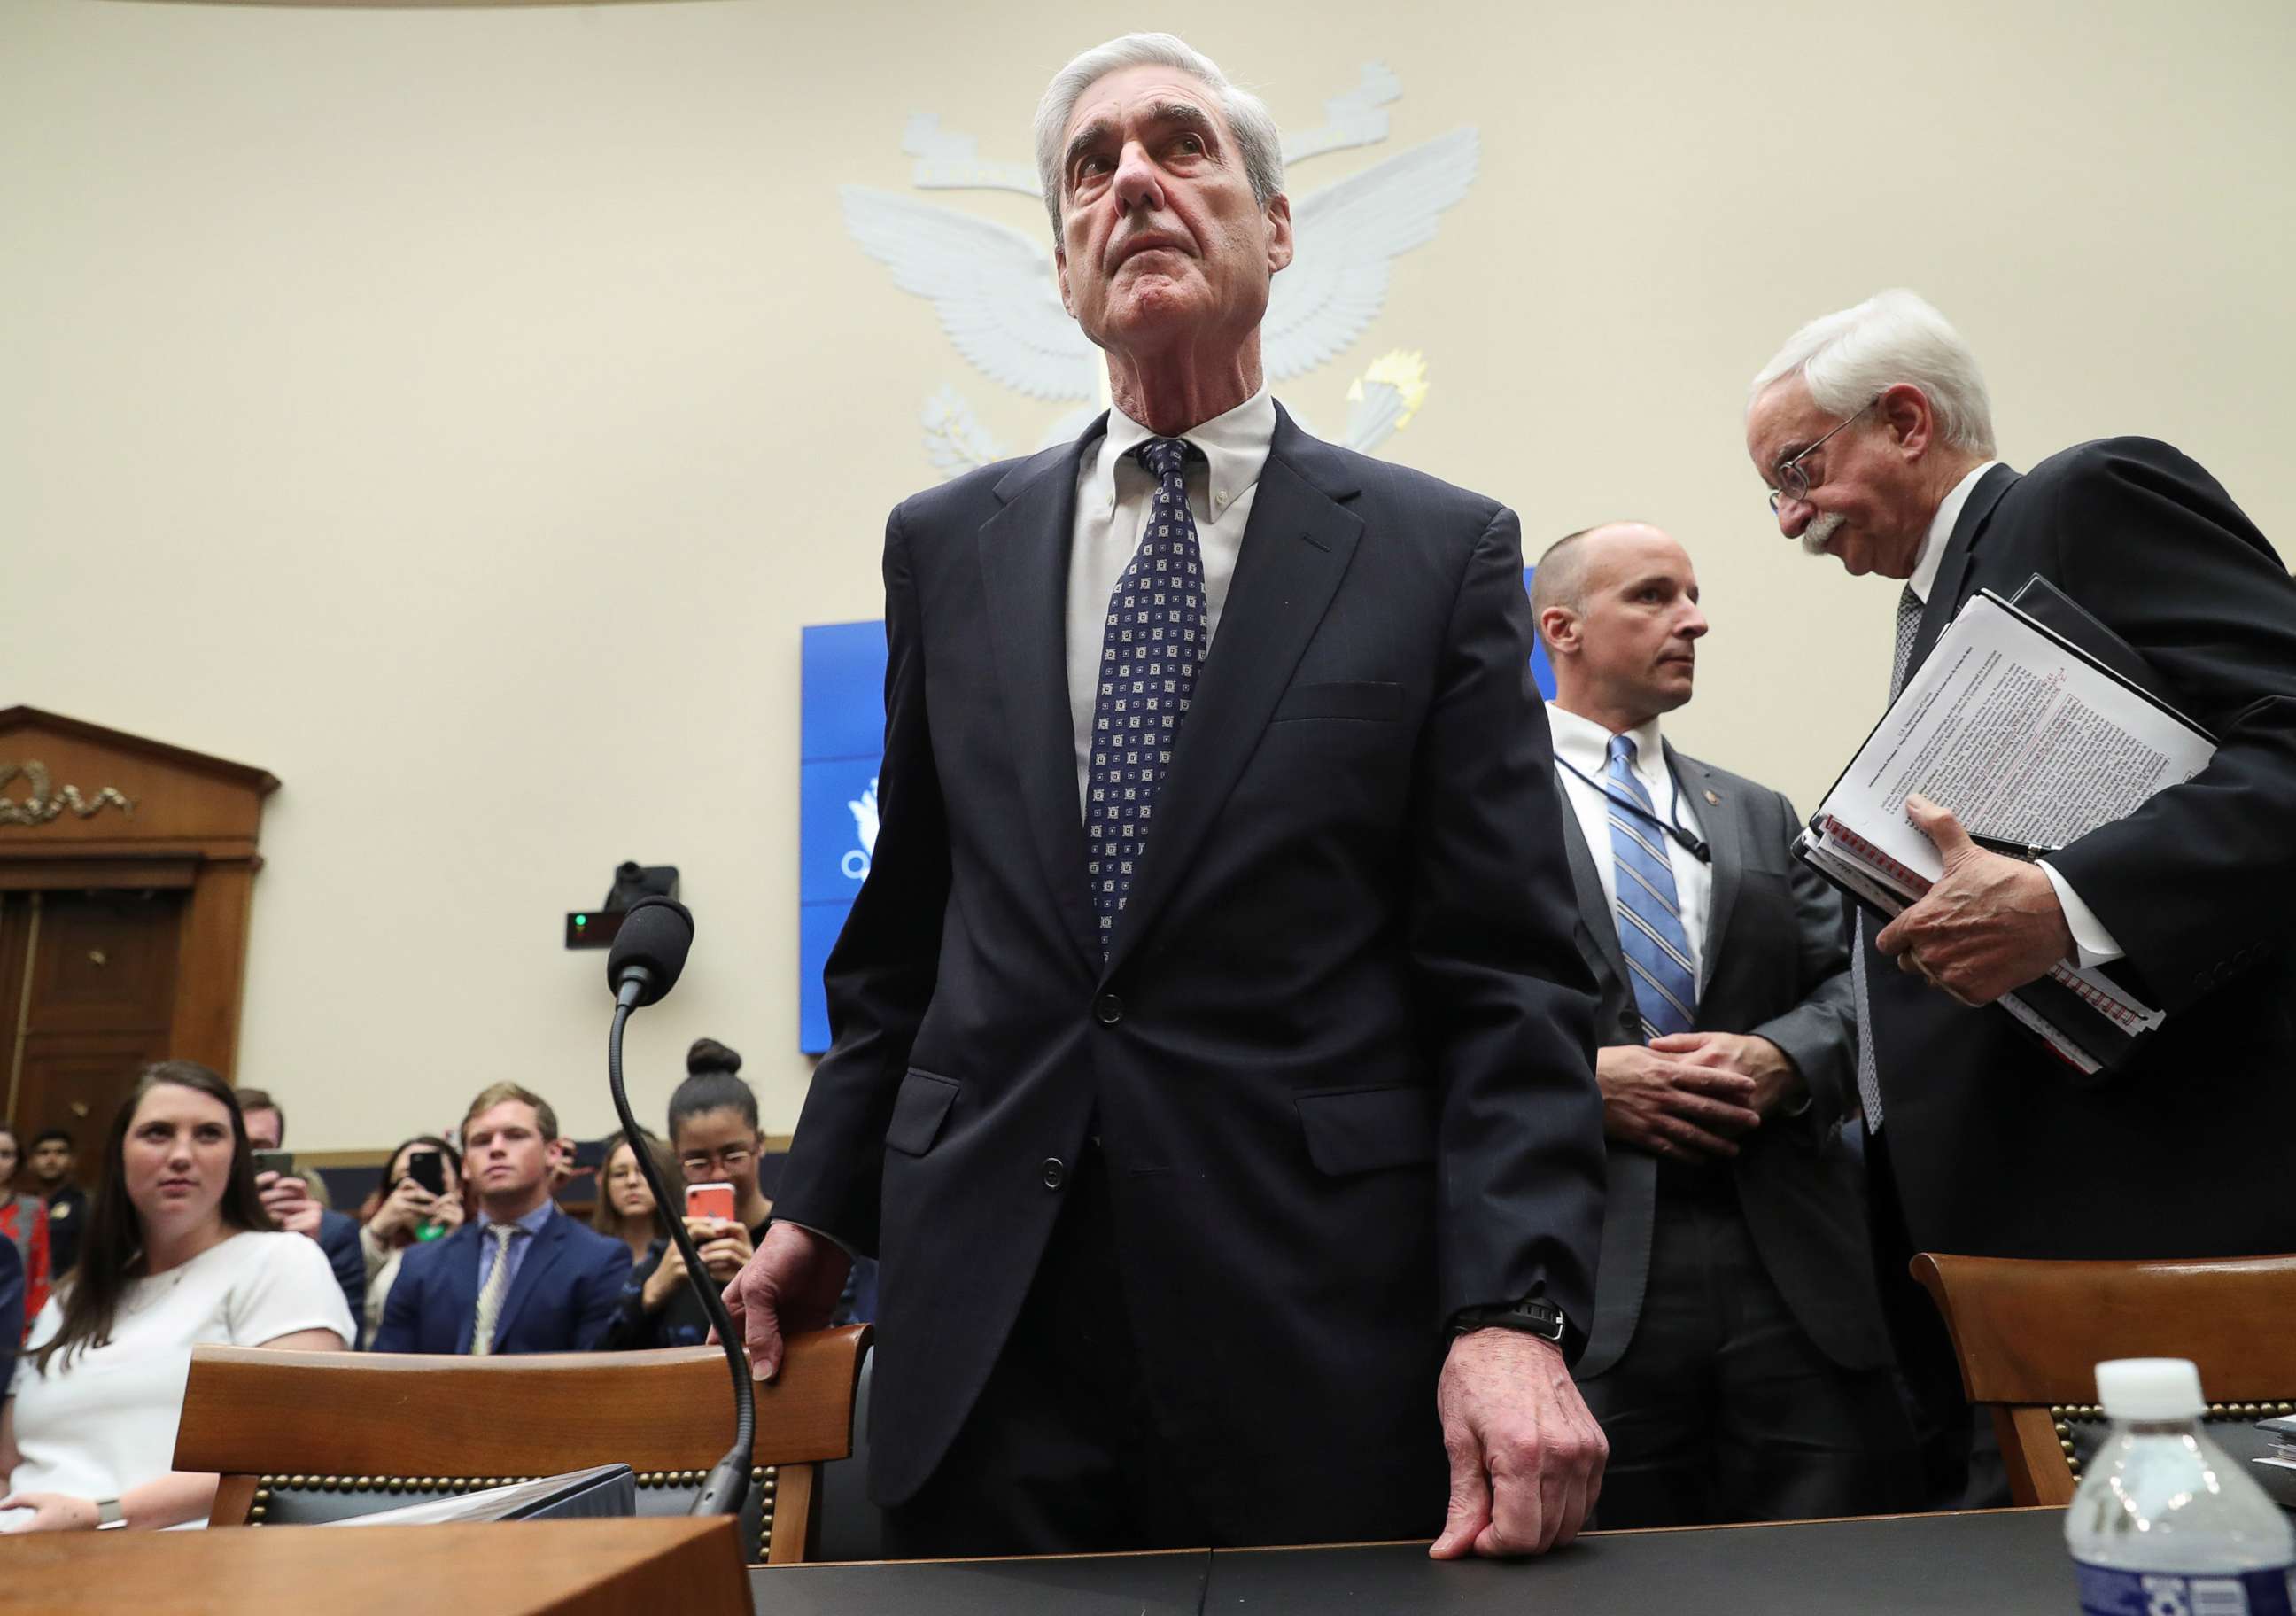 PHOTO: Former Special Counsel Robert Mueller returns to resume testimony before a House Intelligence Committee hearing on the Office of Special Counsel's investigation into Russian interference in the election, July 24, 2019, in Washington, D.C.